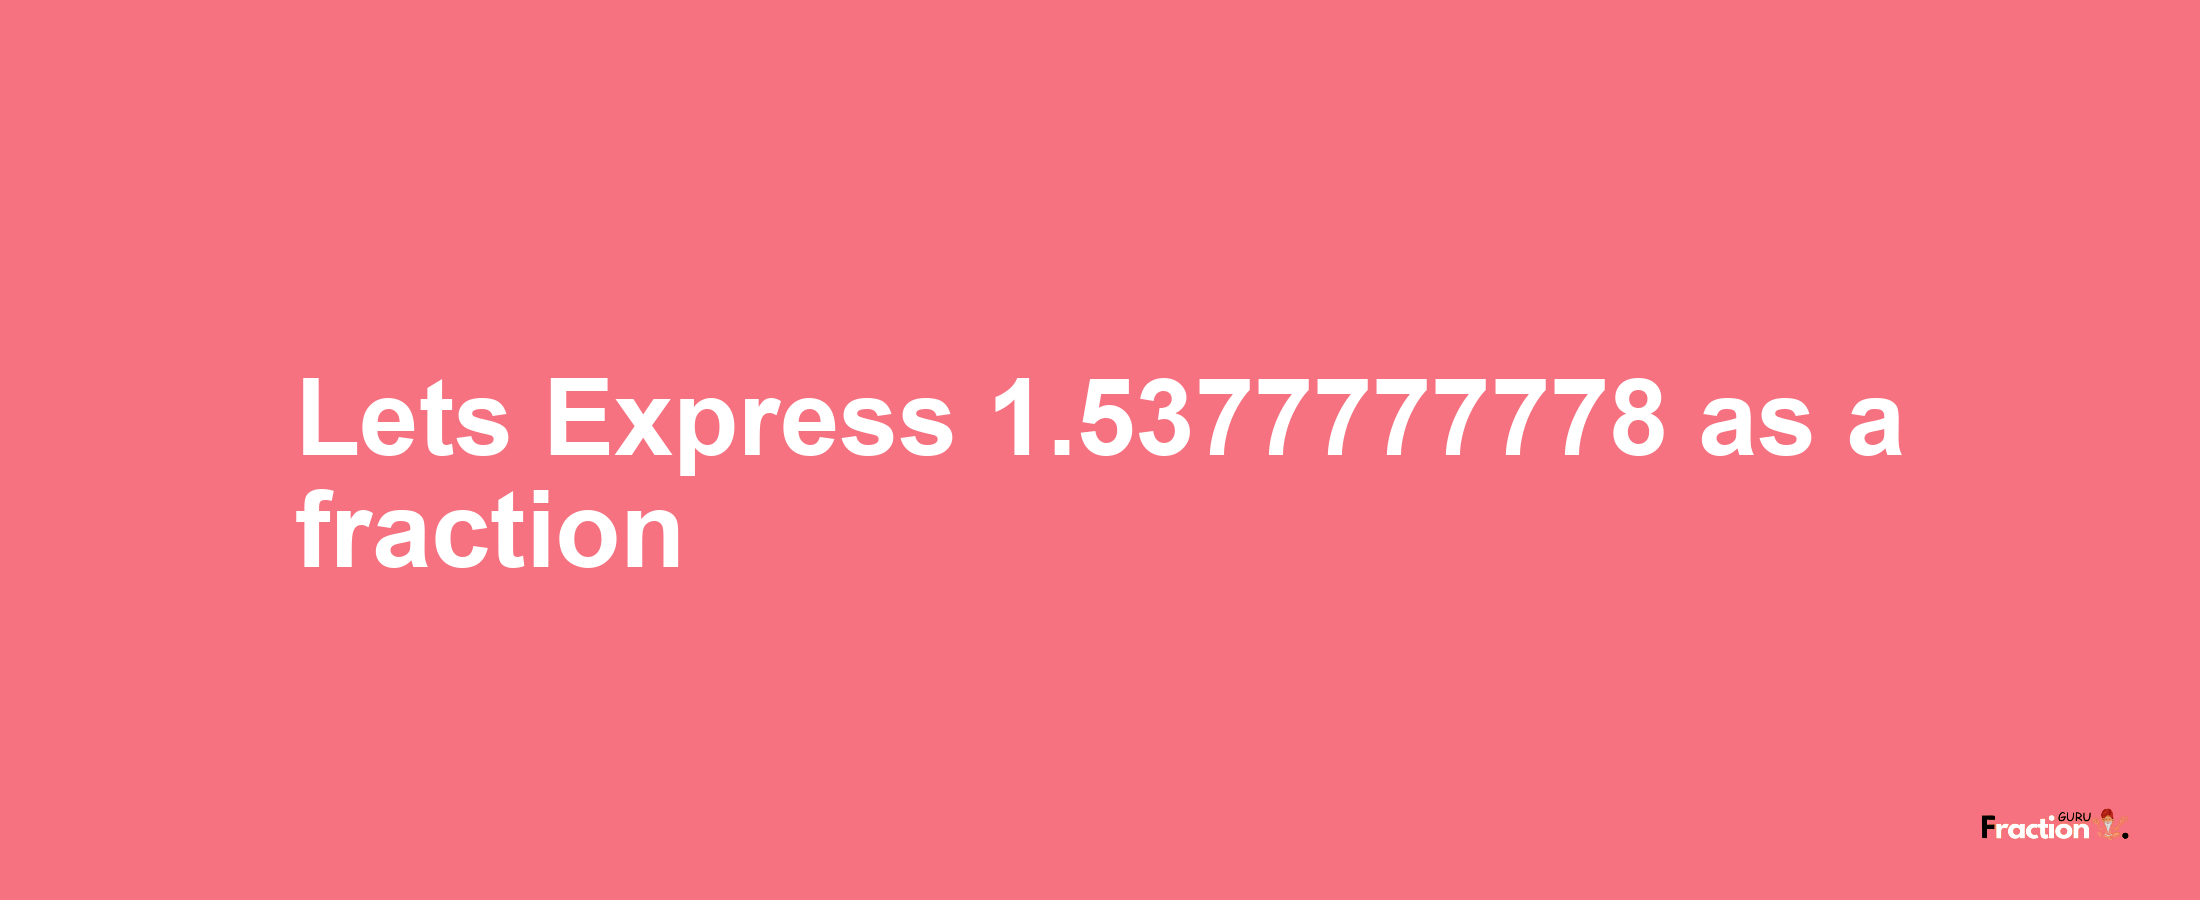 Lets Express 1.5377777778 as afraction